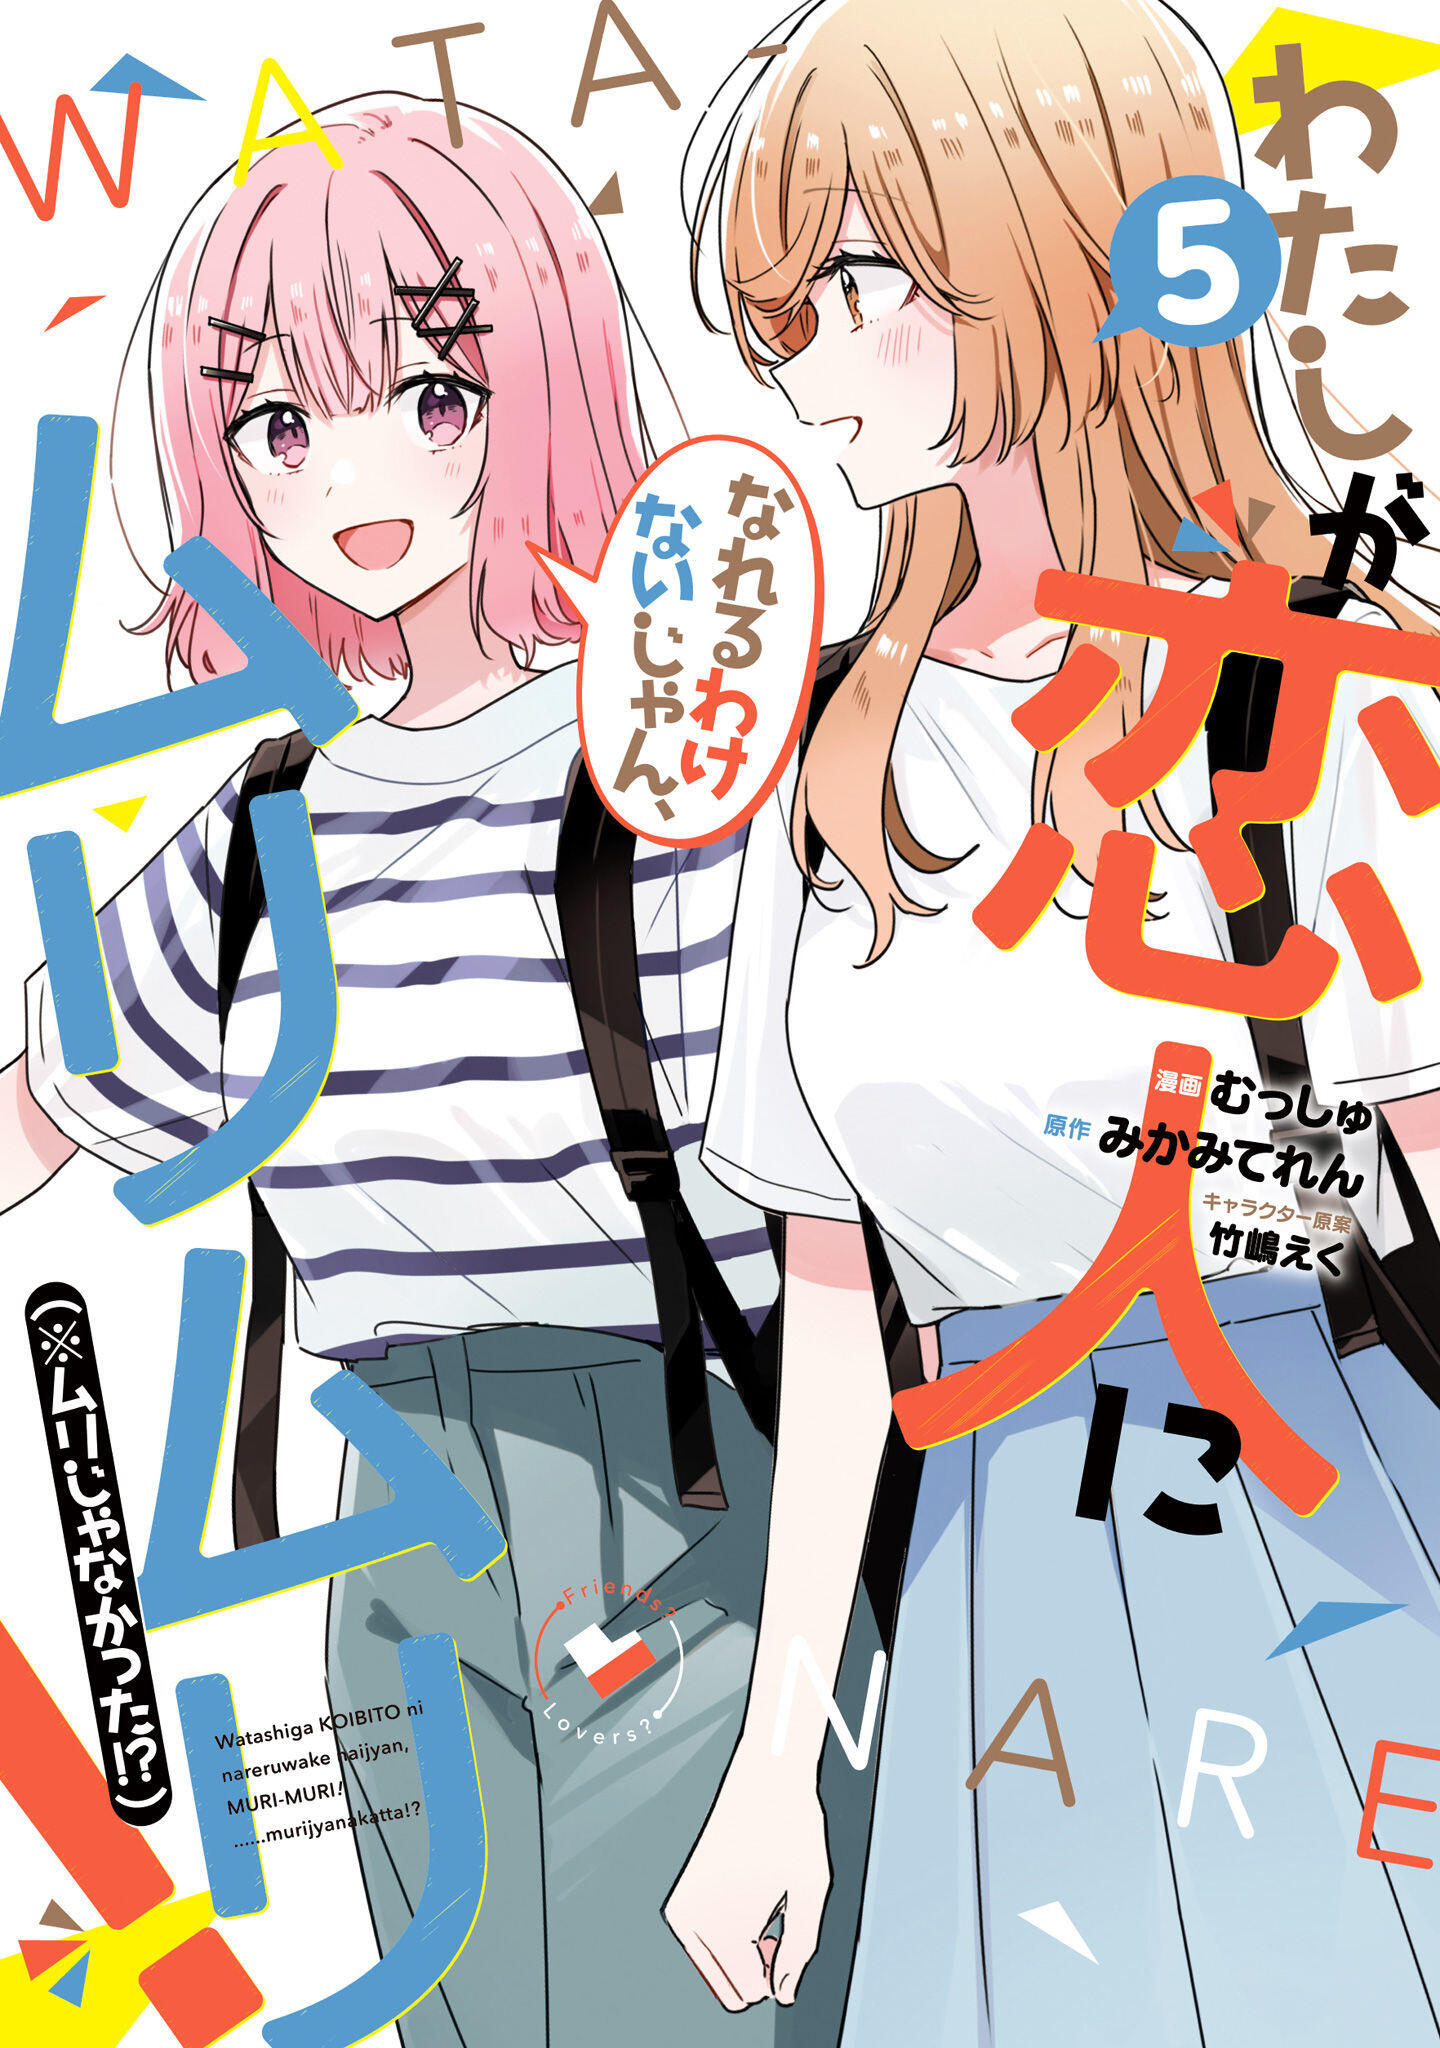 The Quintessential Quintuplets, Chapter 39 - The Quintessential Quintuplets  Manga Online